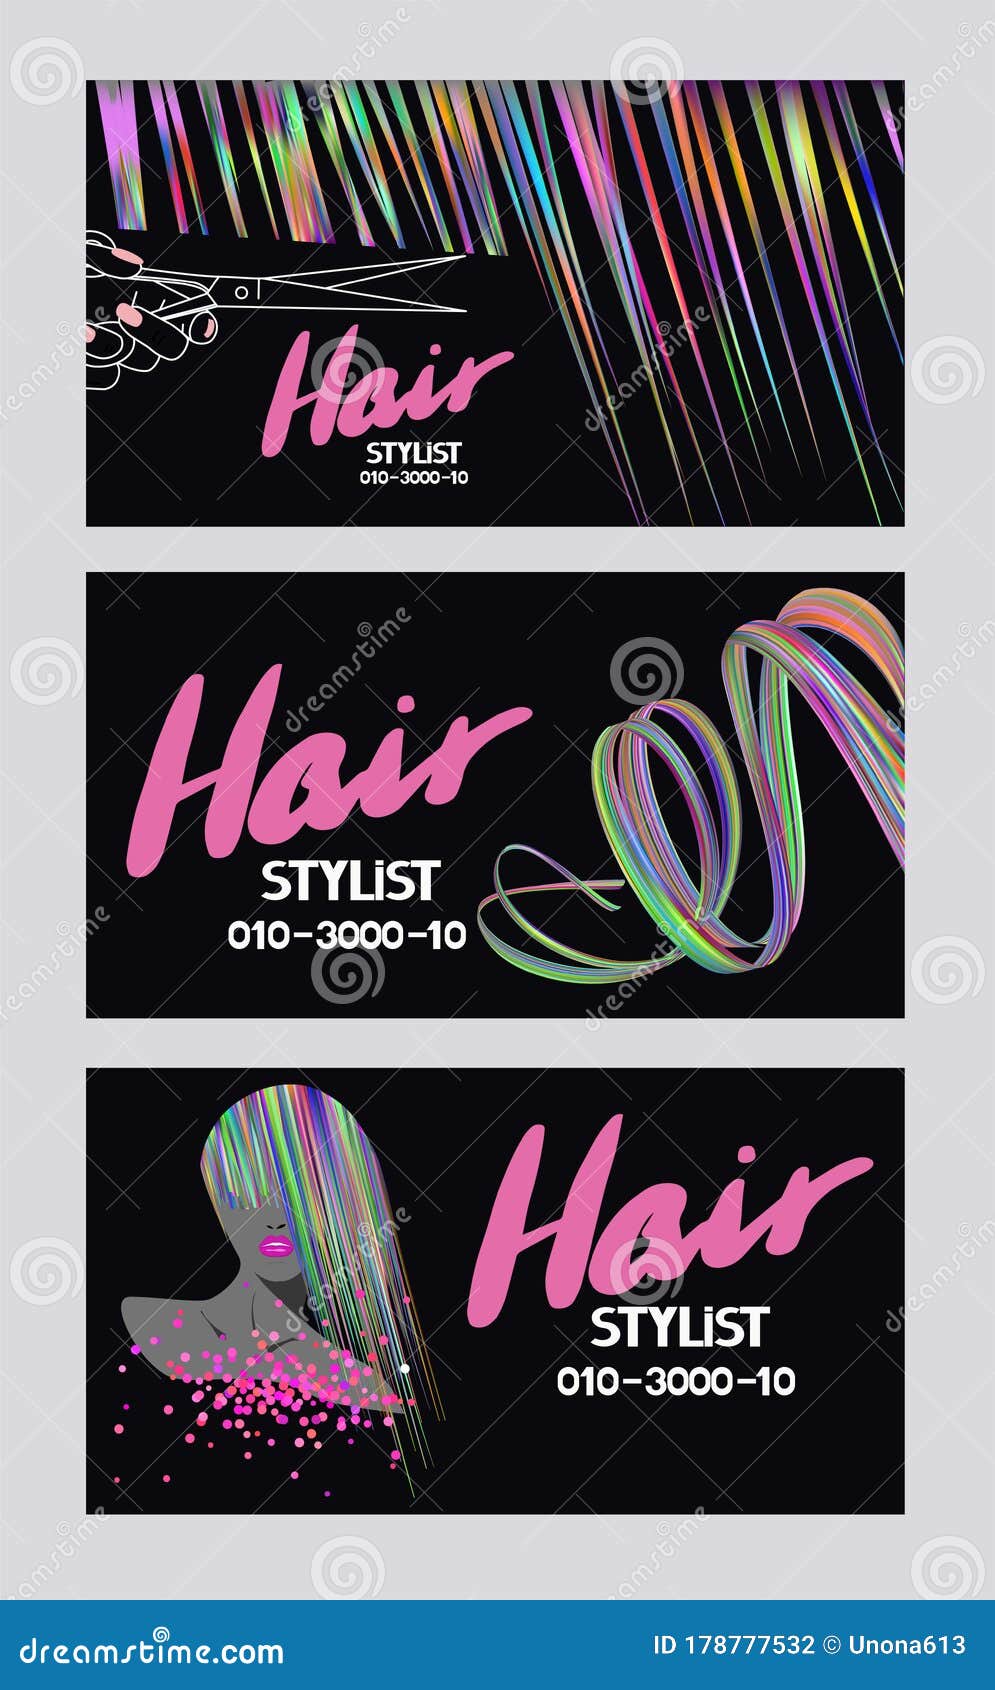 hair stylist busines cards with multicolor abstract hair.